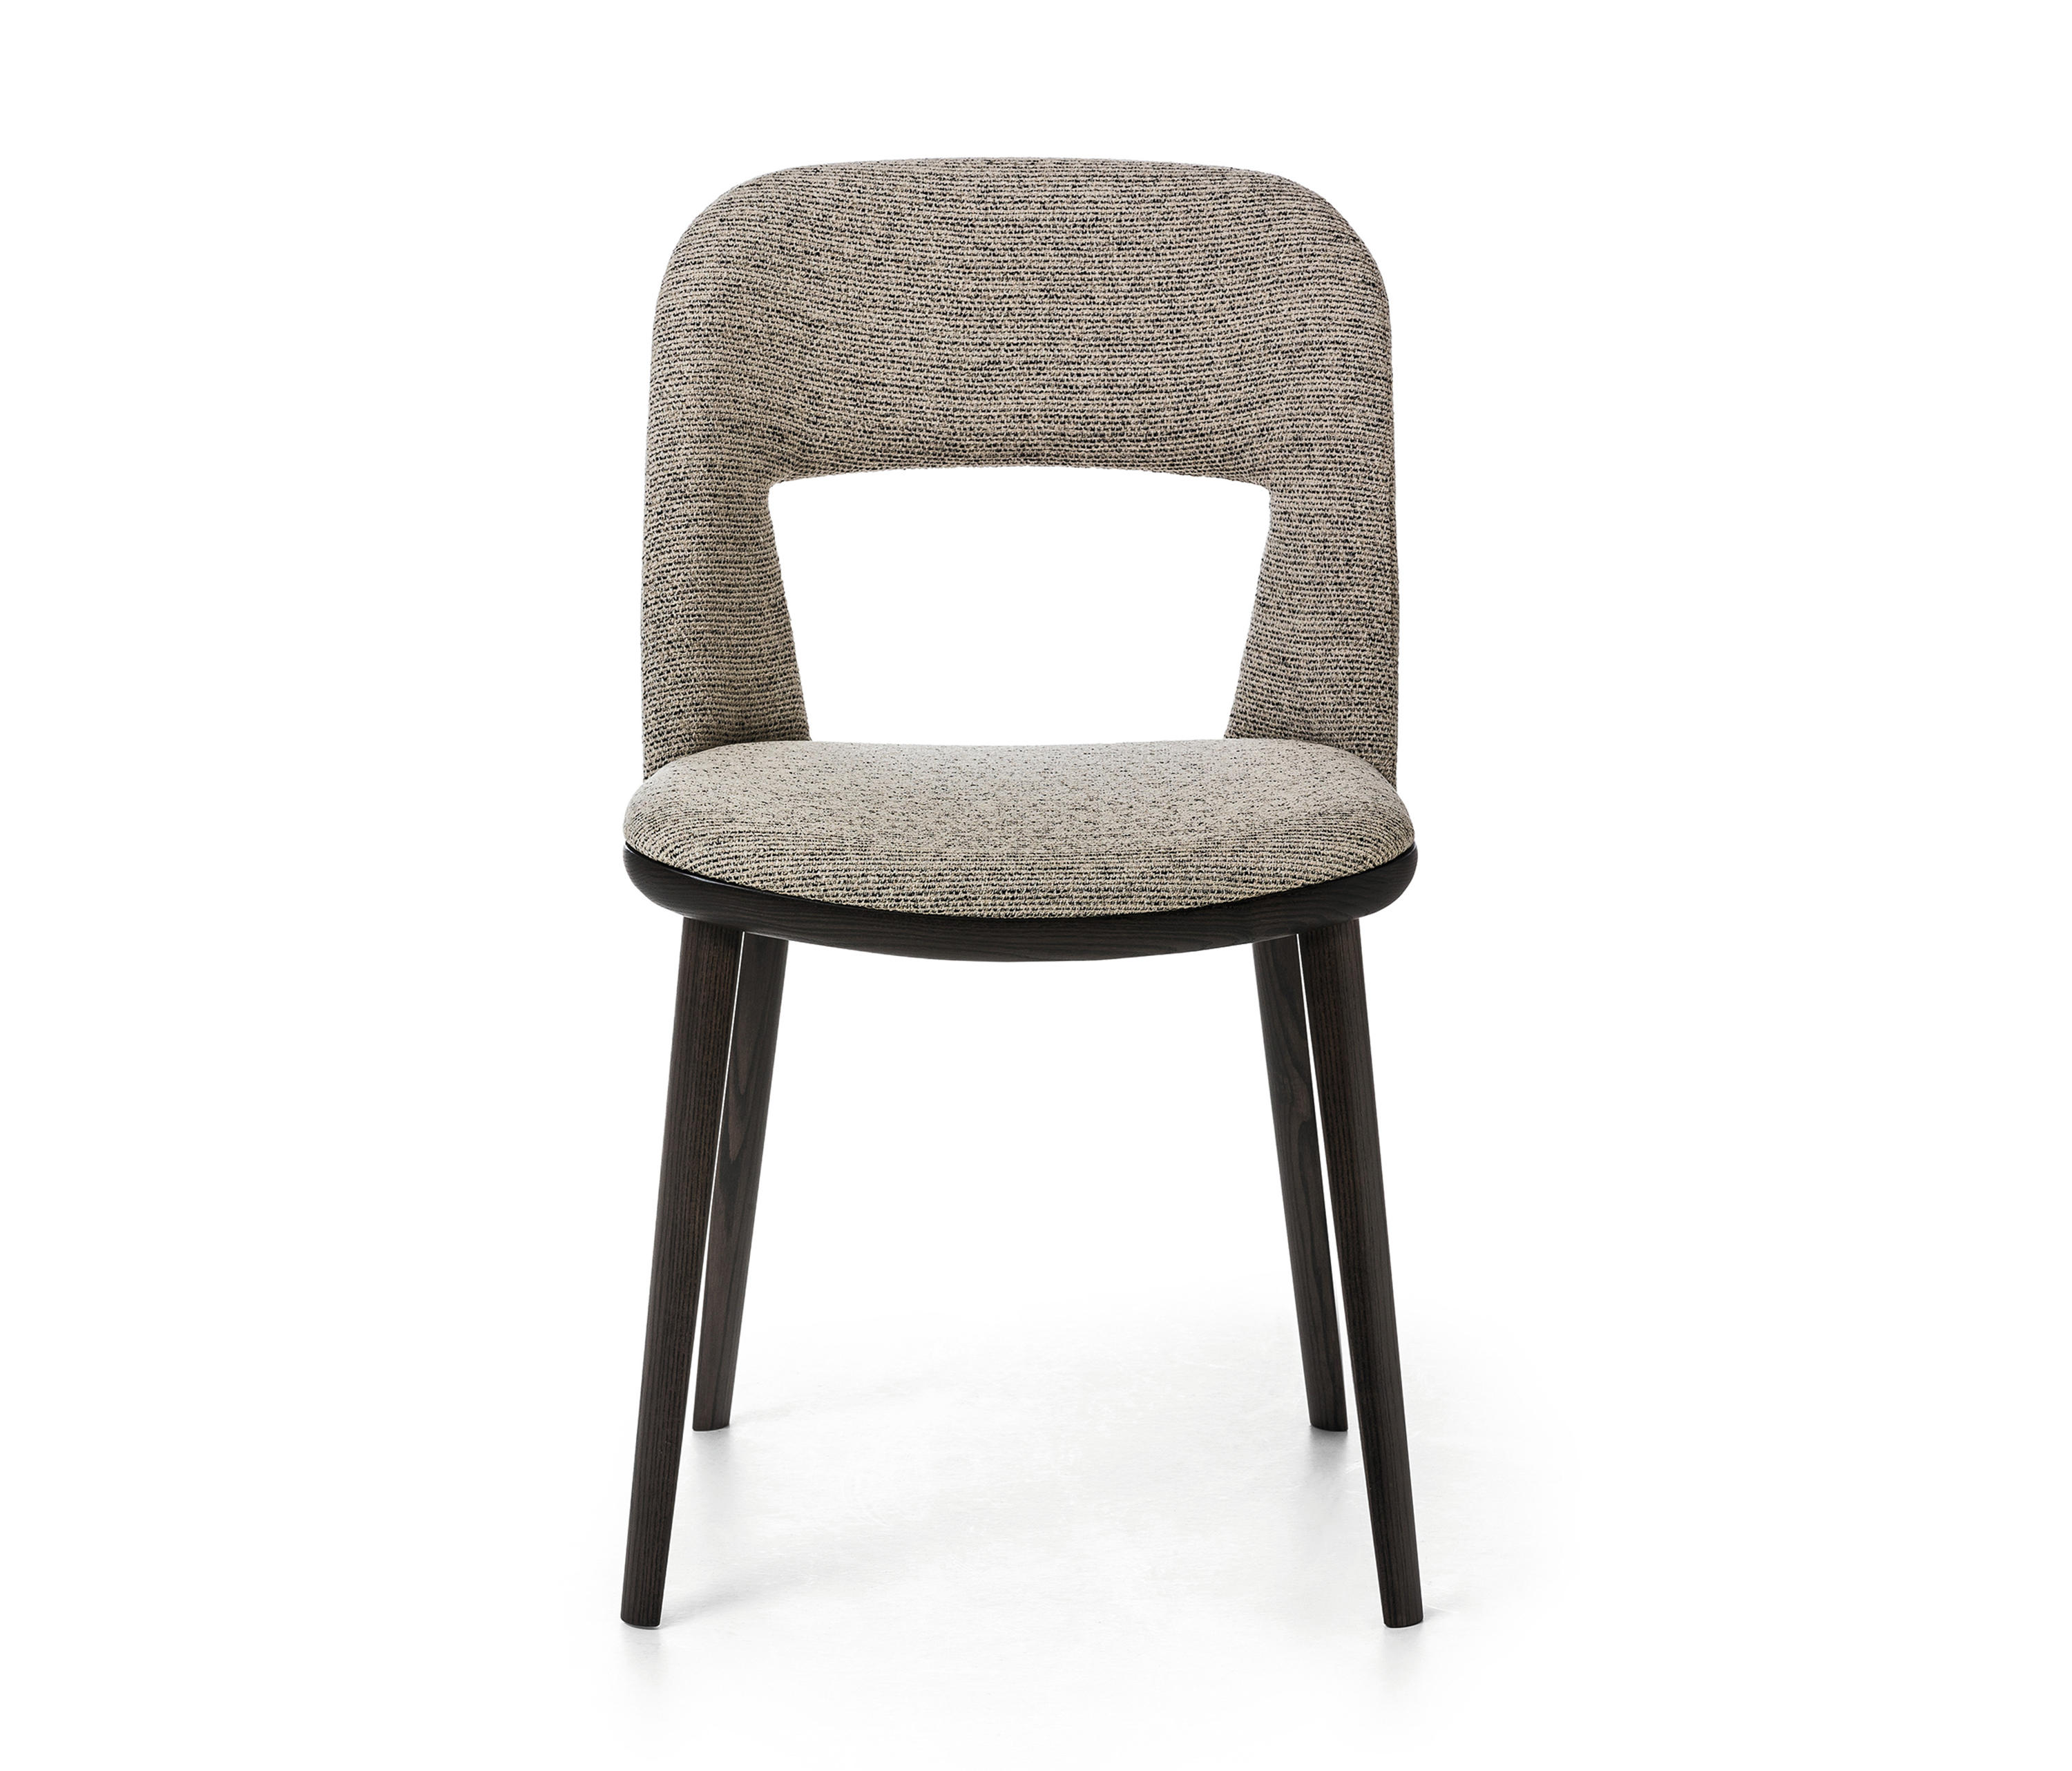 Path Chair by Bross